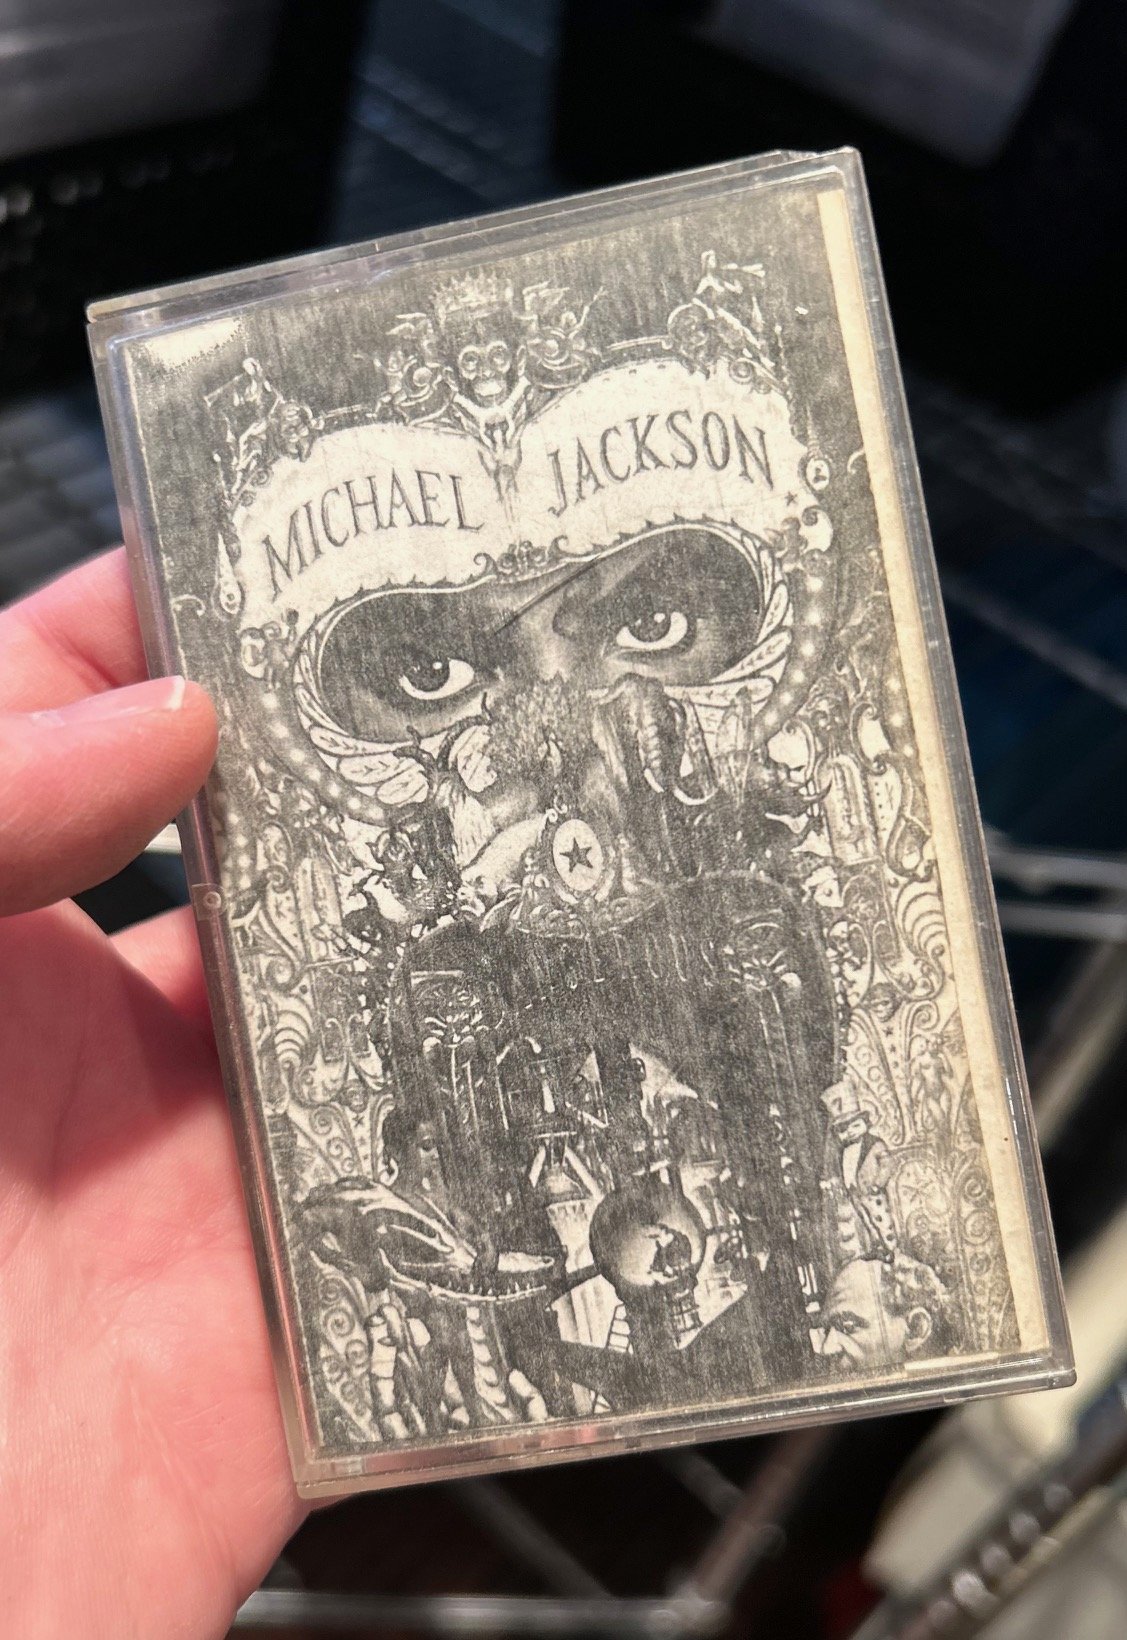    My copy of Michael Jackson’s Dangerous. One of the very few things I’d brought over with me. It saw me through some of the hardest days of Year One.   